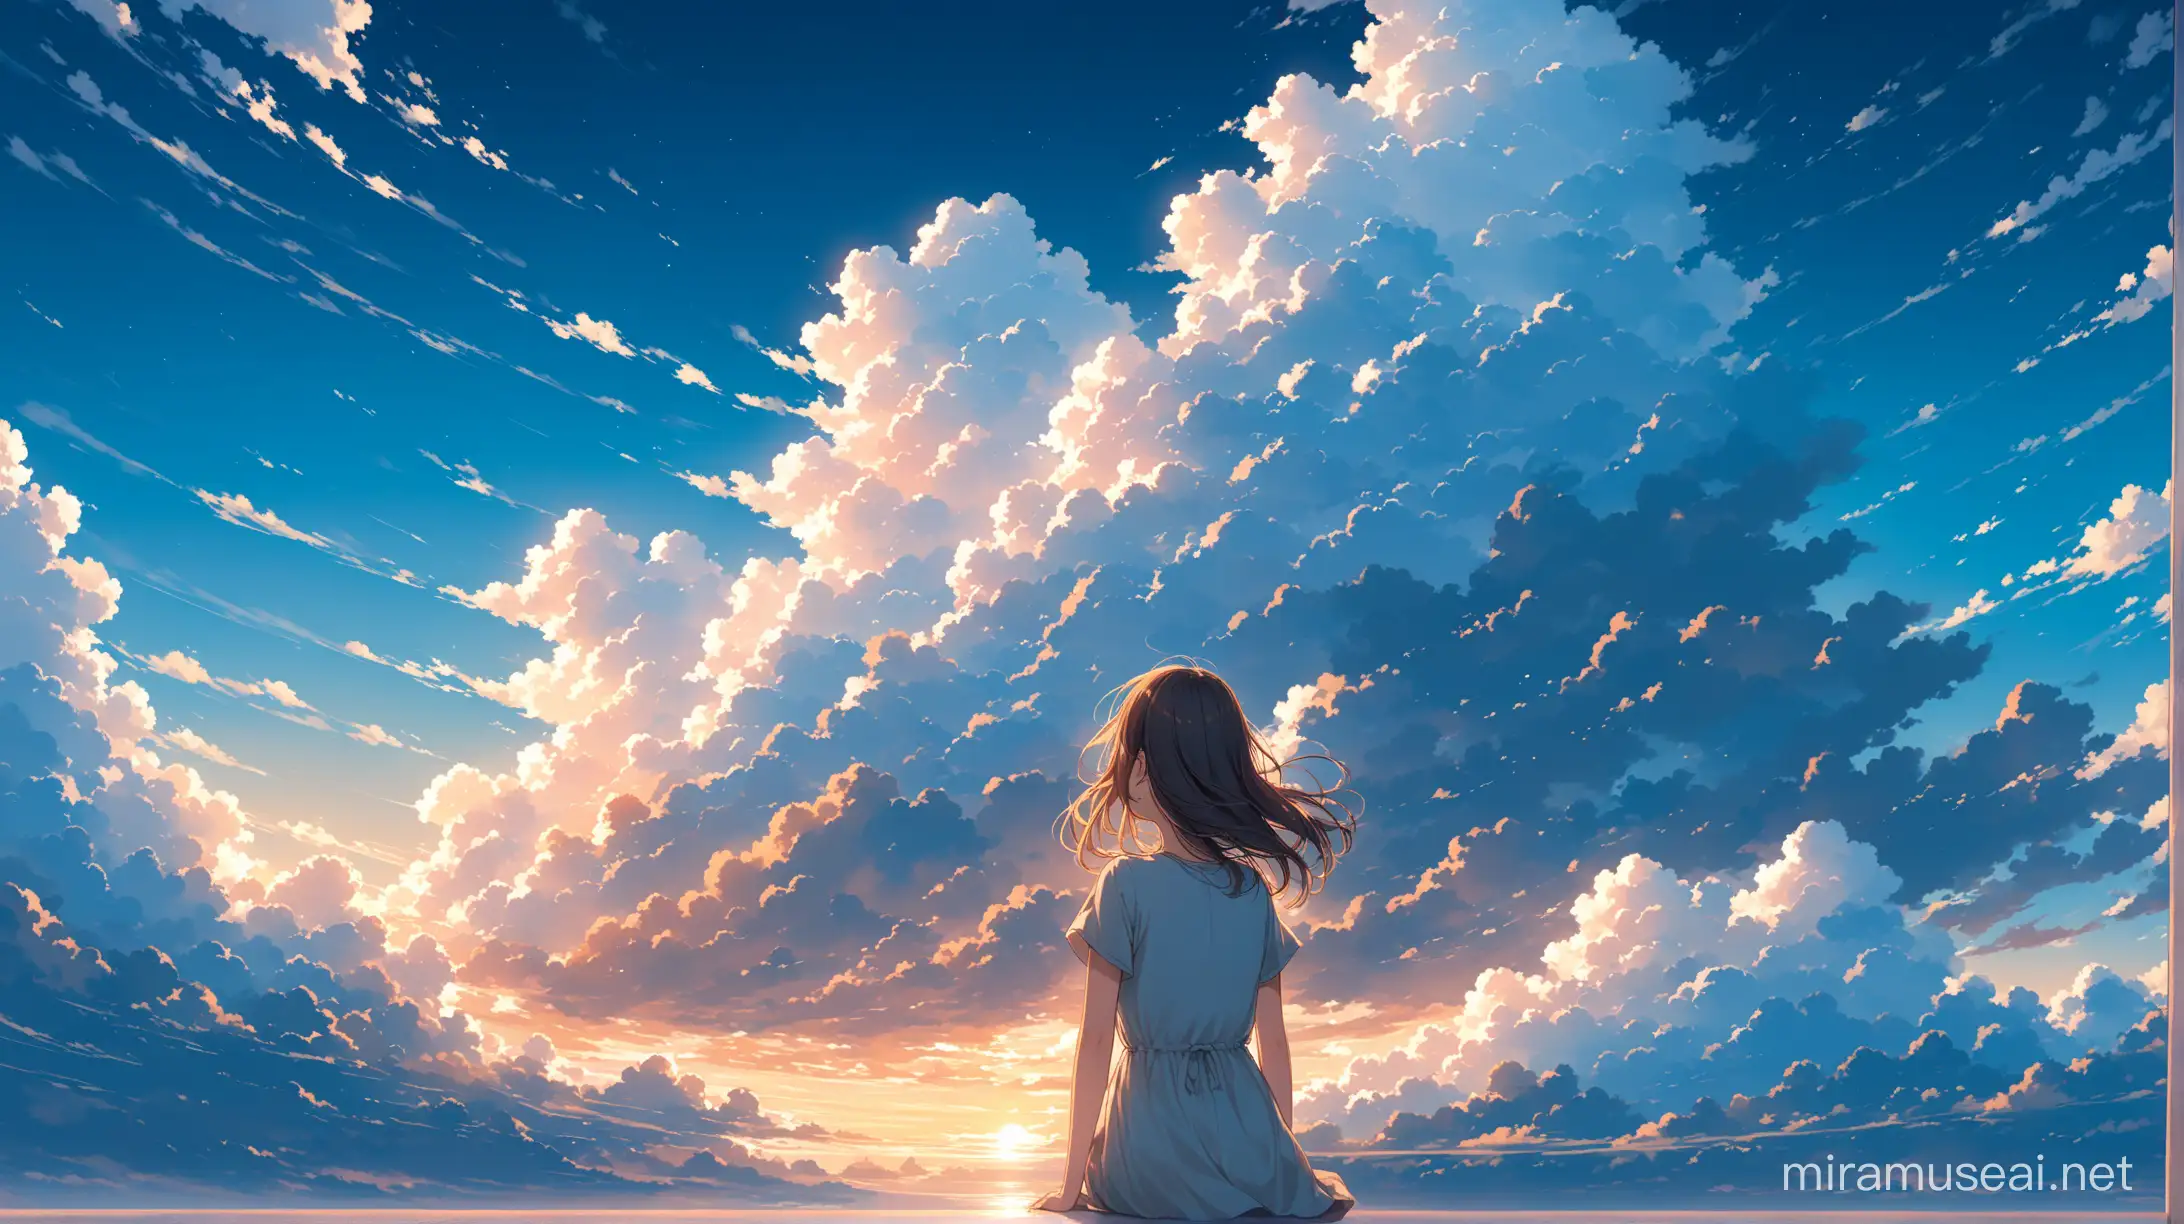 a girl watching the clouds as she falls through the sky far away like the movie weathering with you